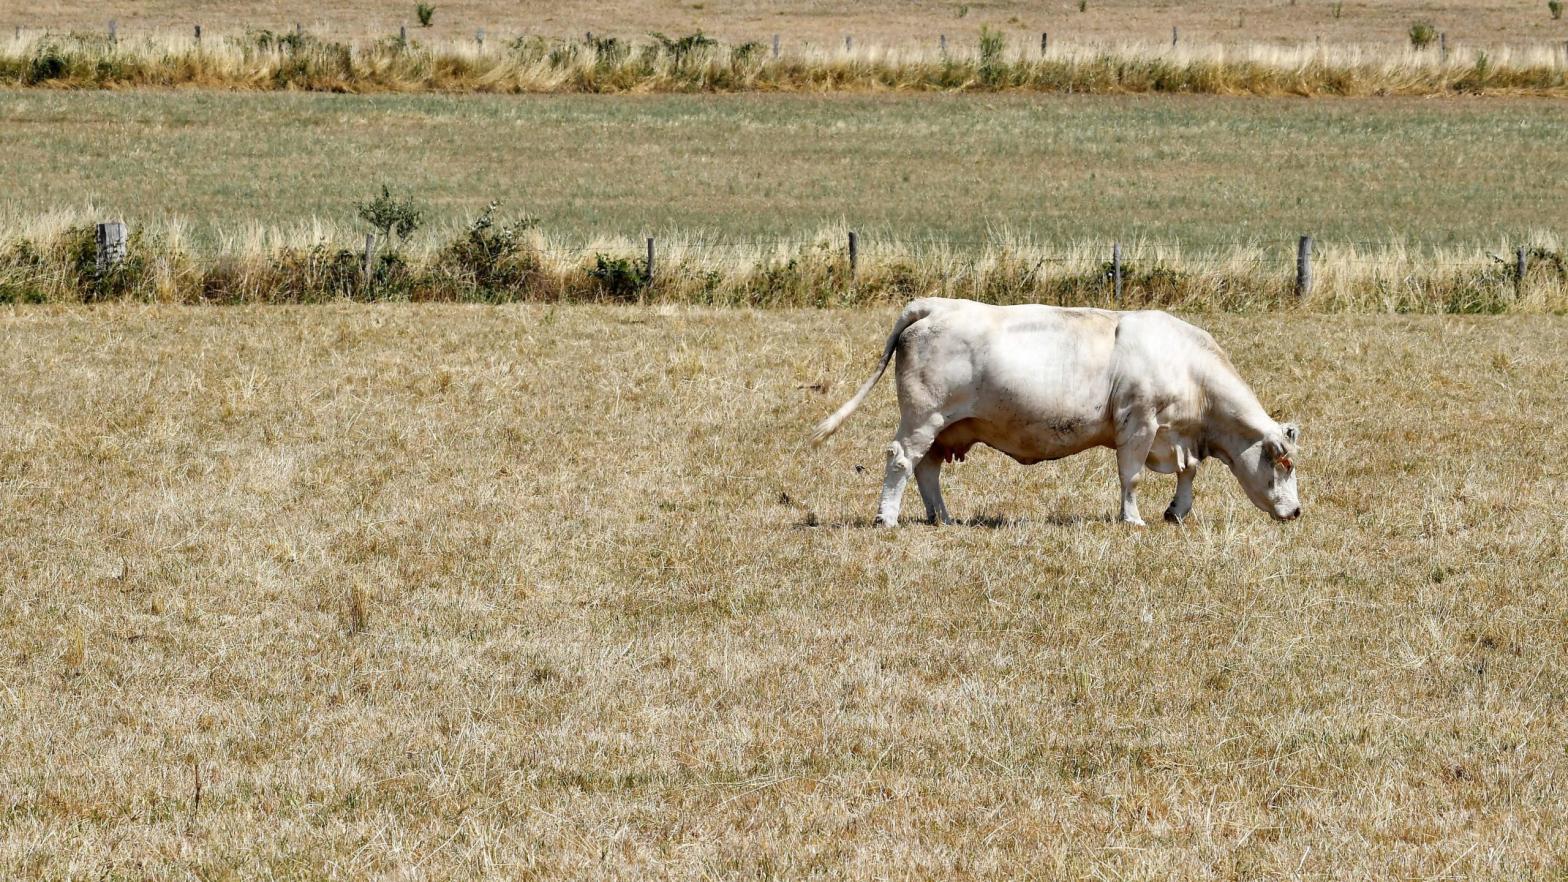 A cow looks for food on dry grassland as the Creuse Region experience extreme and exceptional drought conditions on July 20, 2019, near Lussat, Creuse region, central France. (Photo: GEORGES GOBET, Getty Images)